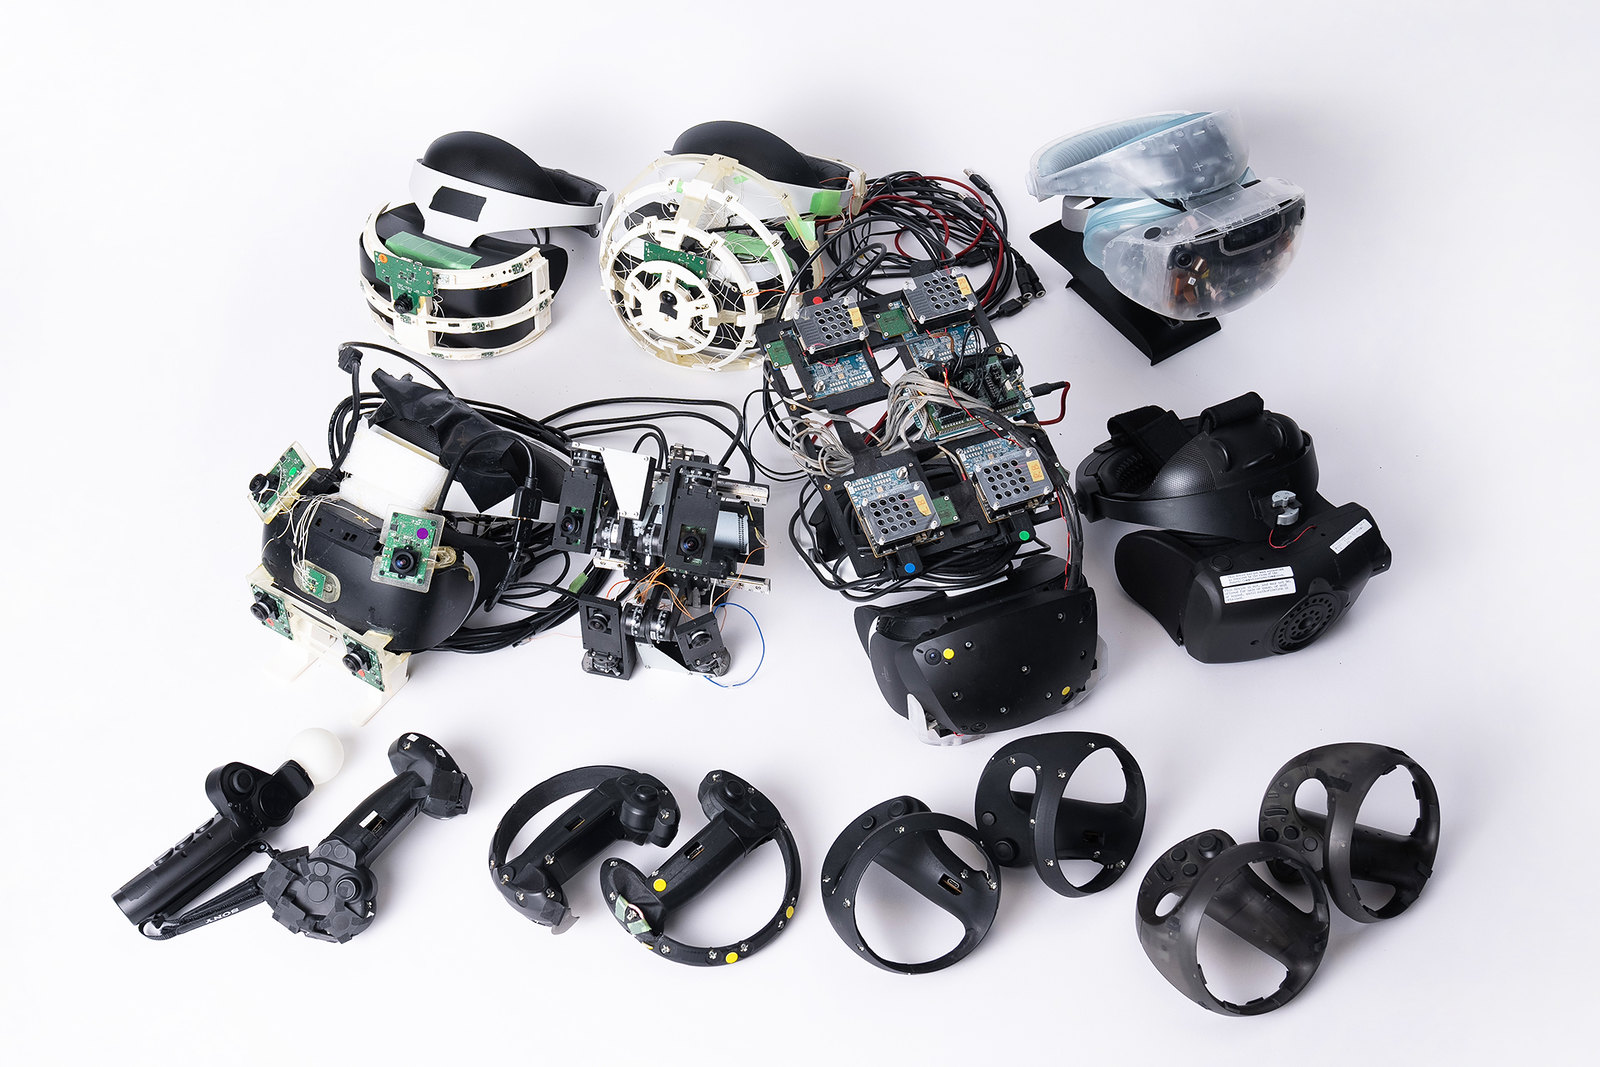 All the prototypes for PS VR2 headset and the PS VR2 Sense controllers.